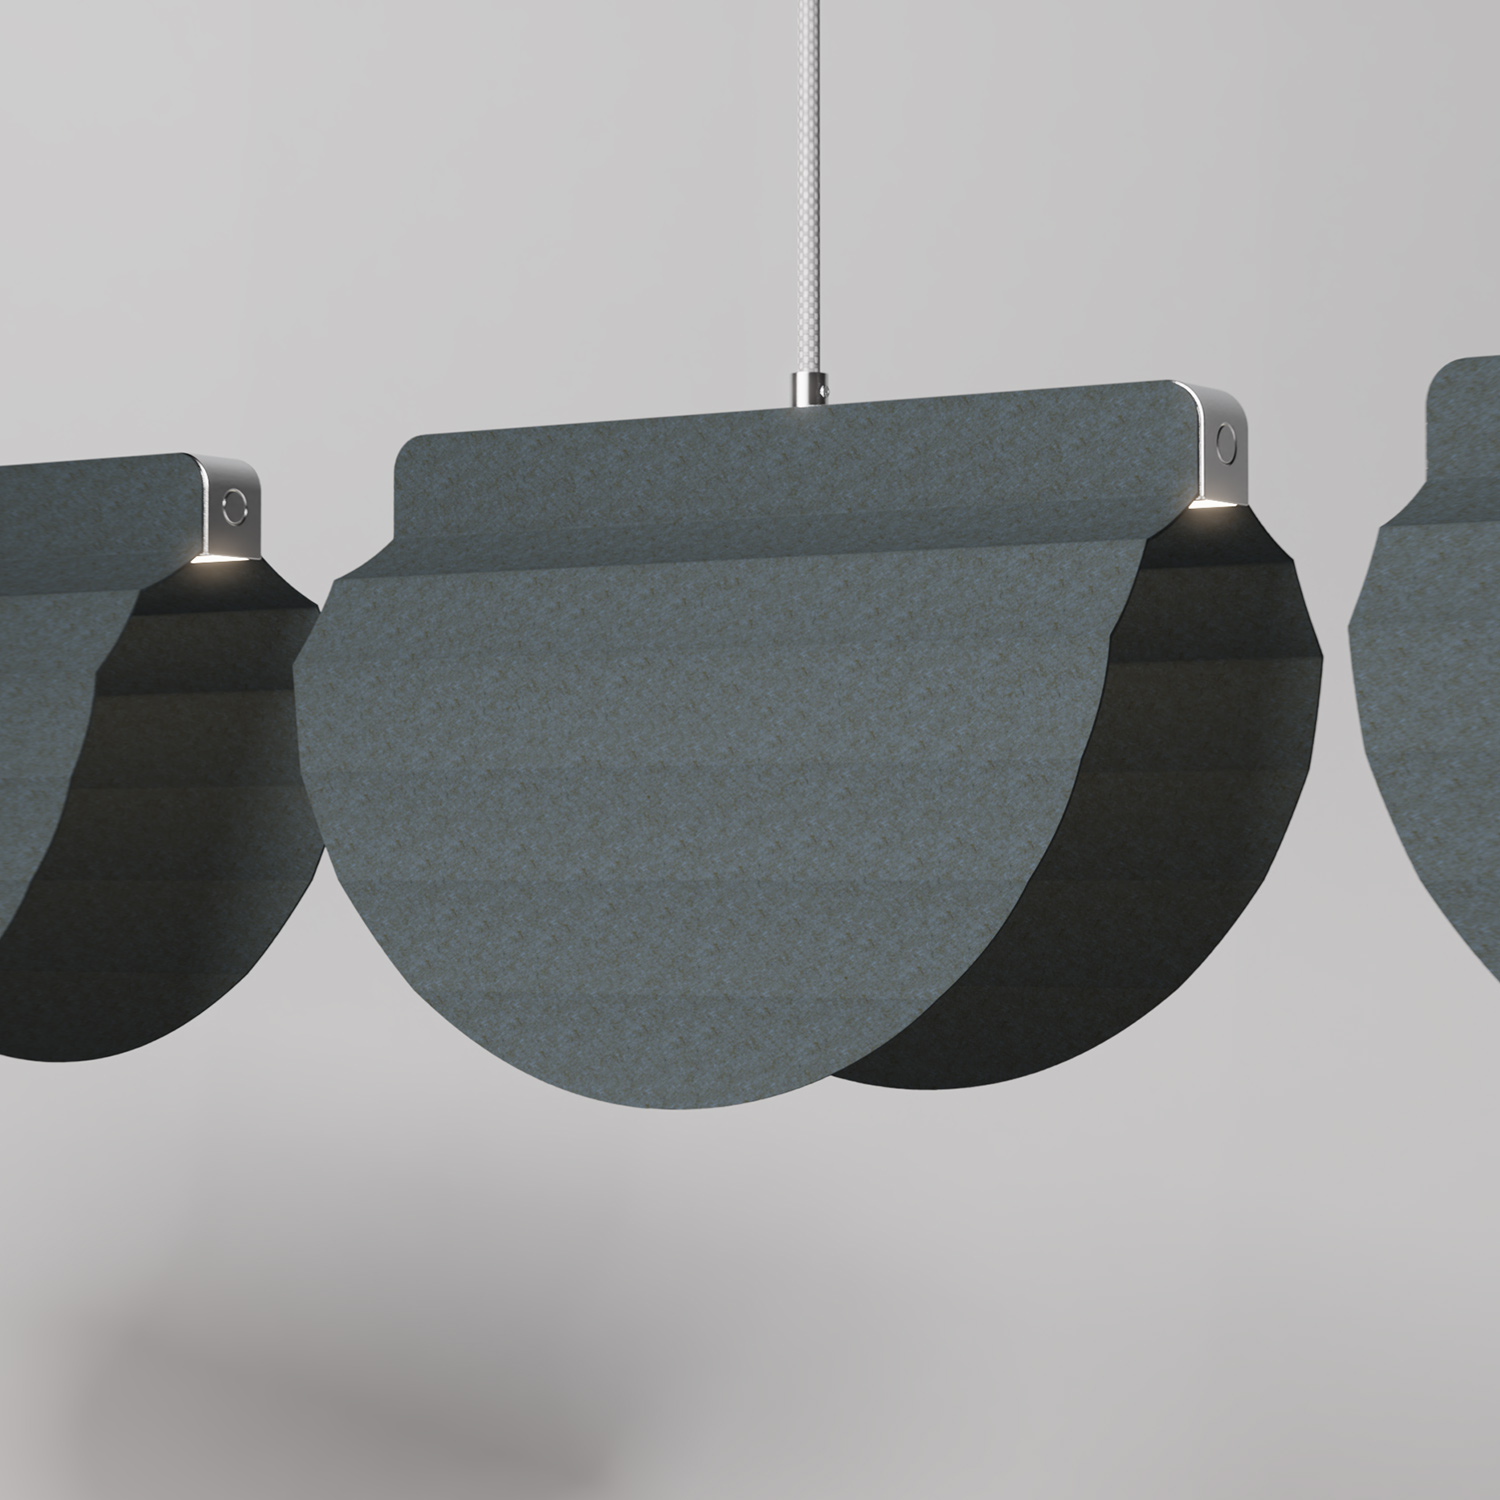 Rendering - PULP as a blue-colored pendant light